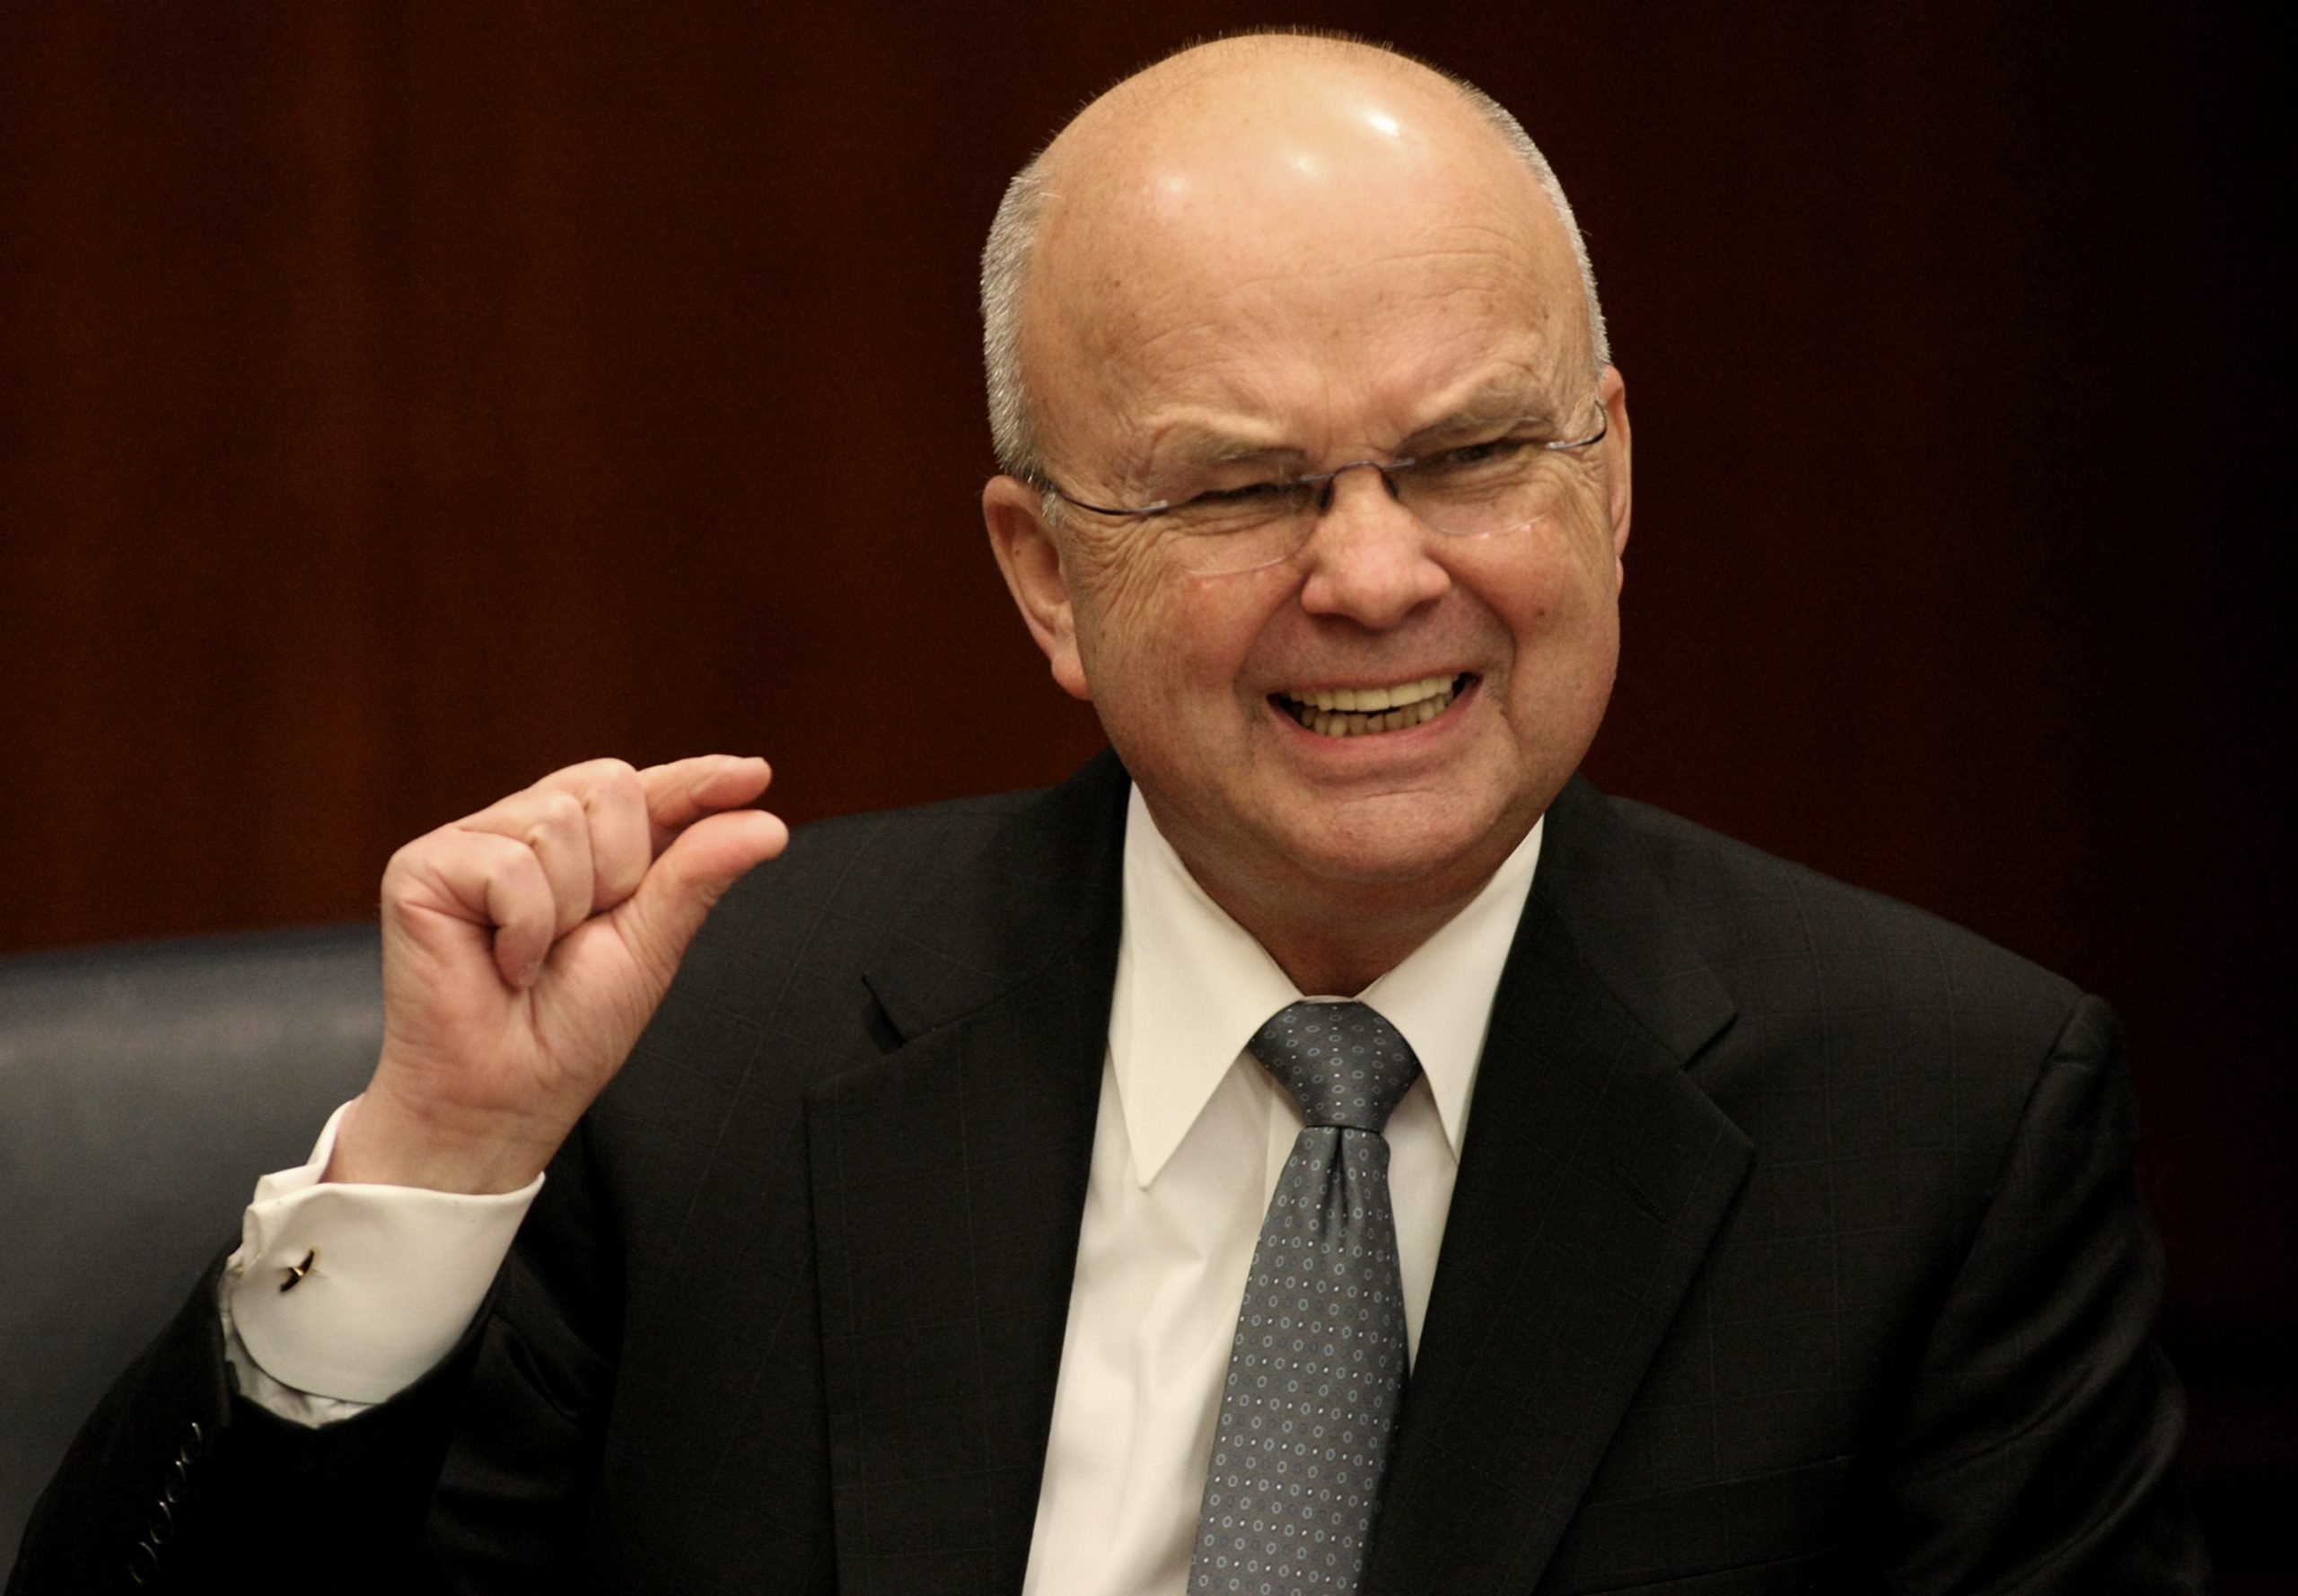 "The problem we have is that our security structures and our security law and policies are all designed to protect us against a malevolent state power," retired Gen. Michael HaydenÂ said.